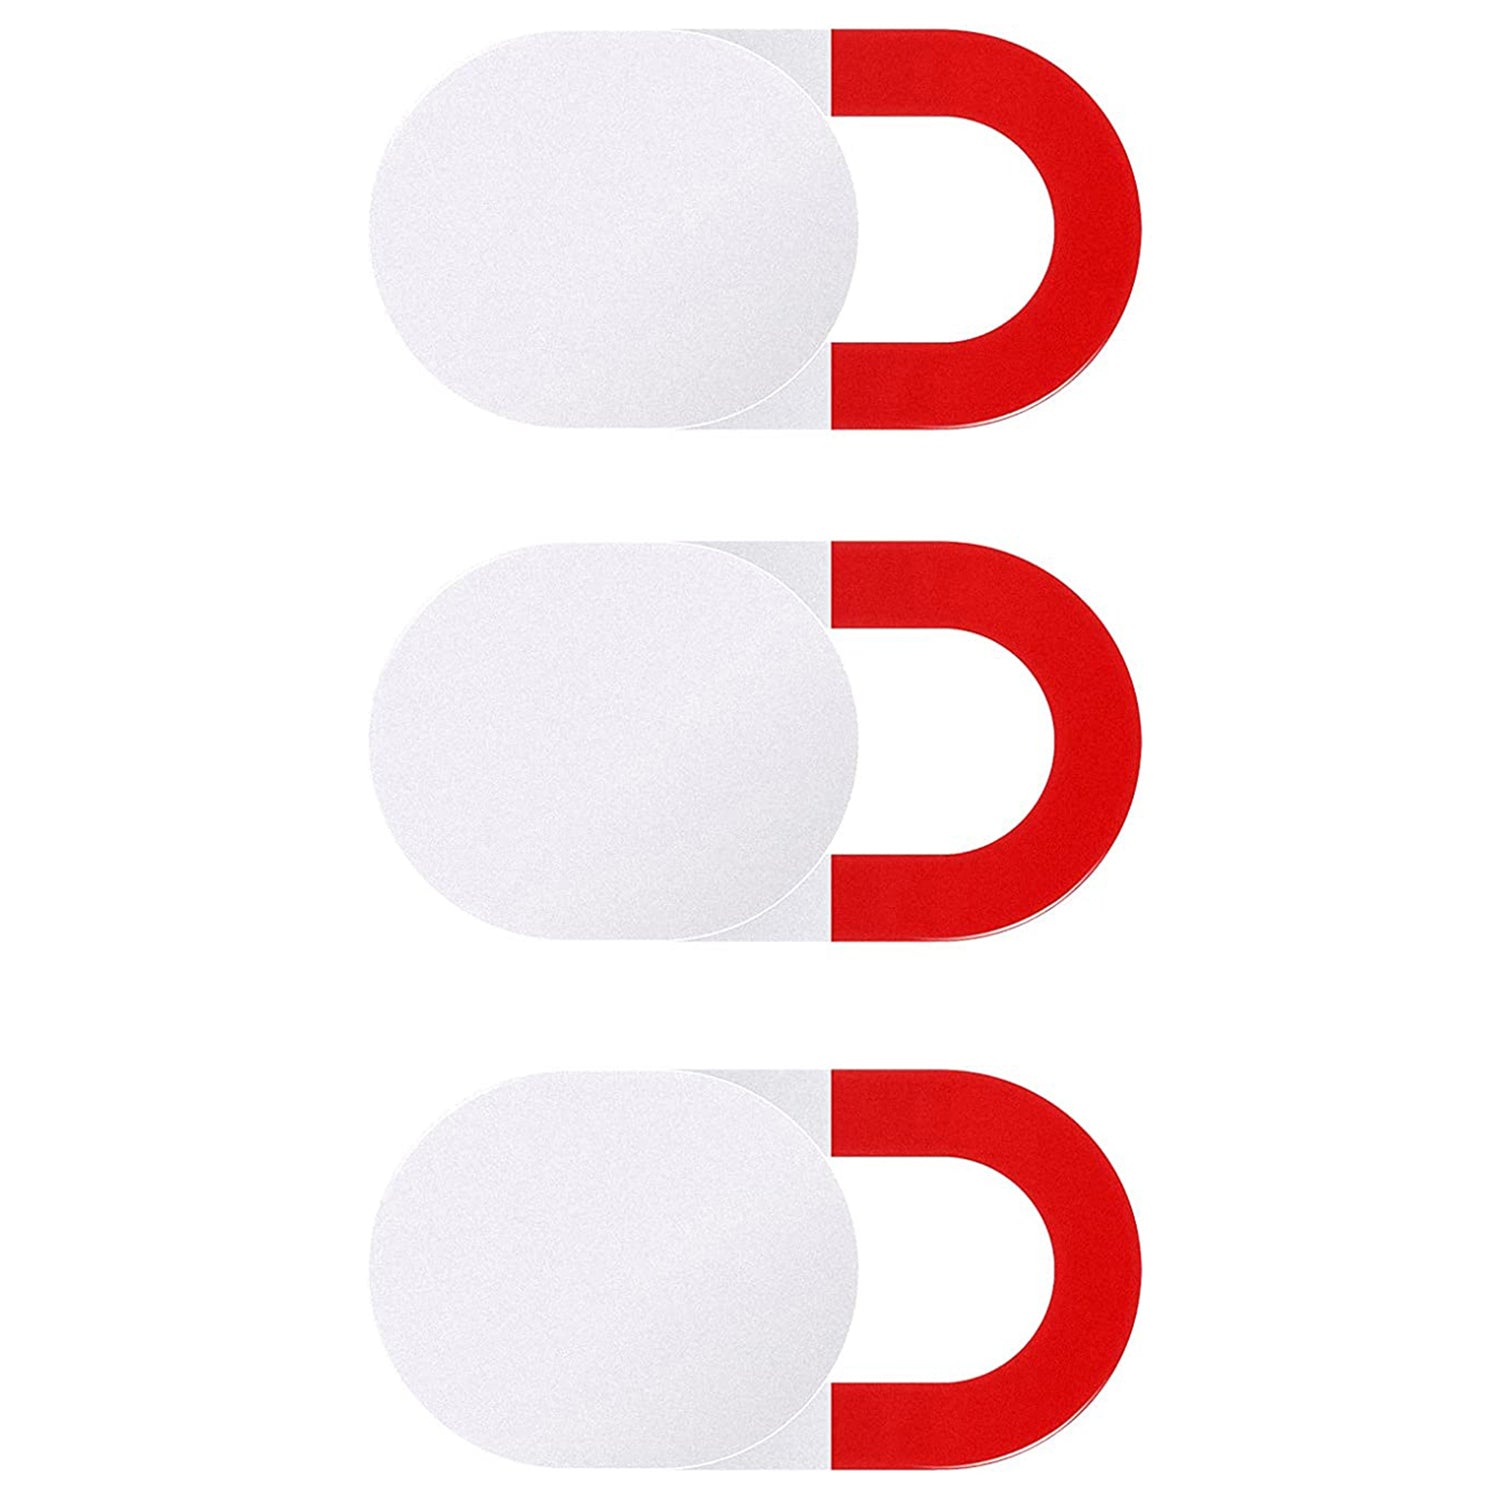 3Pcs Webcam Cover Slide Privacy Security Ultra-Thin Laptop Camera Cover Slide for Phone / Tablet / PC - White / Red